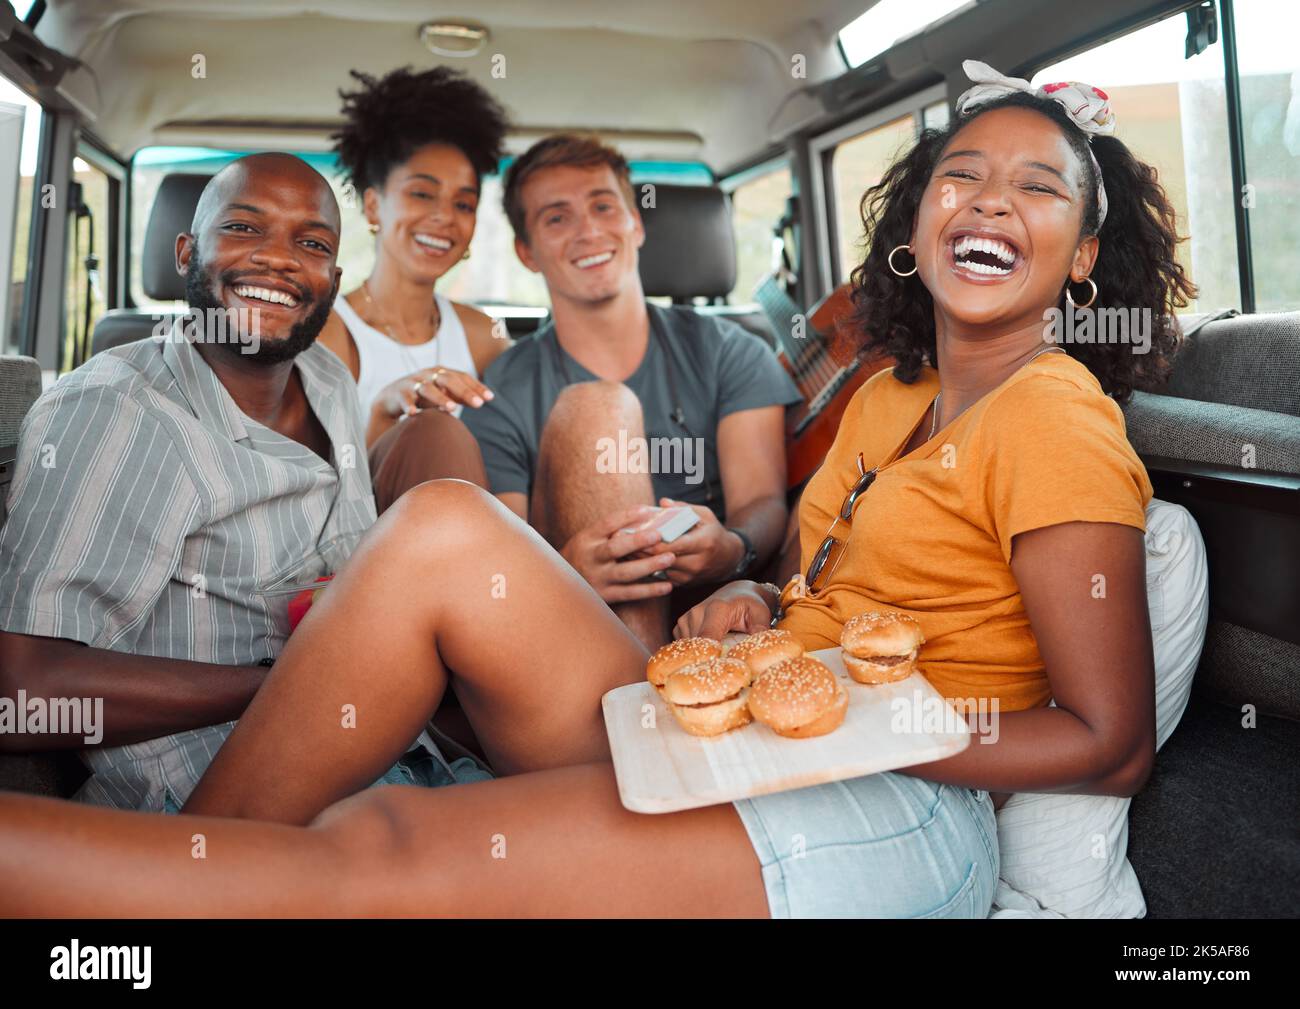 Food, travel and friends eating on a road trip, happy, relax and laughing while bonding in a car together. Fast food, diversity and face portrait of Stock Photo